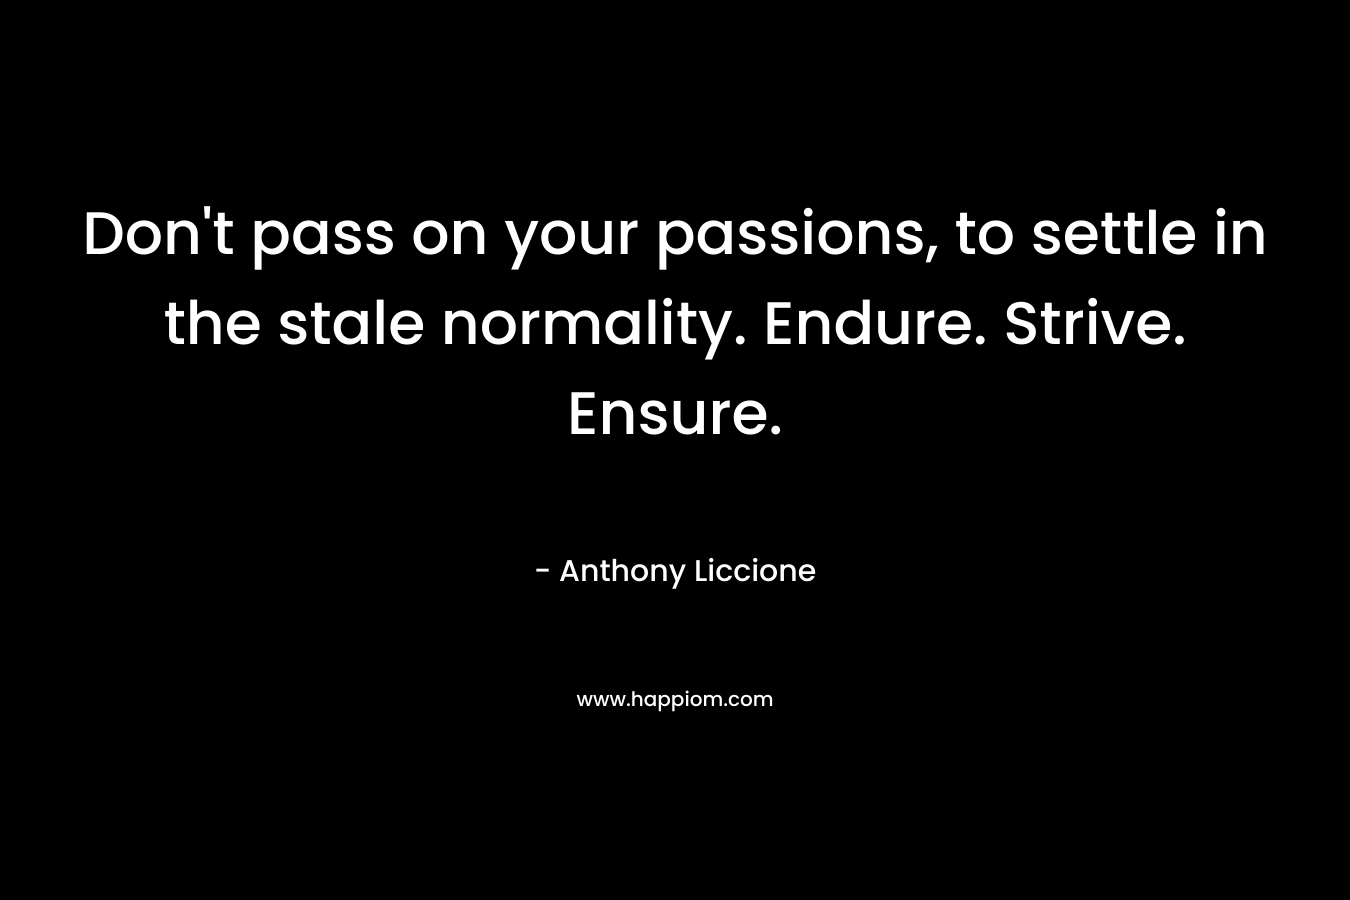 Don't pass on your passions, to settle in the stale normality. Endure. Strive. Ensure.